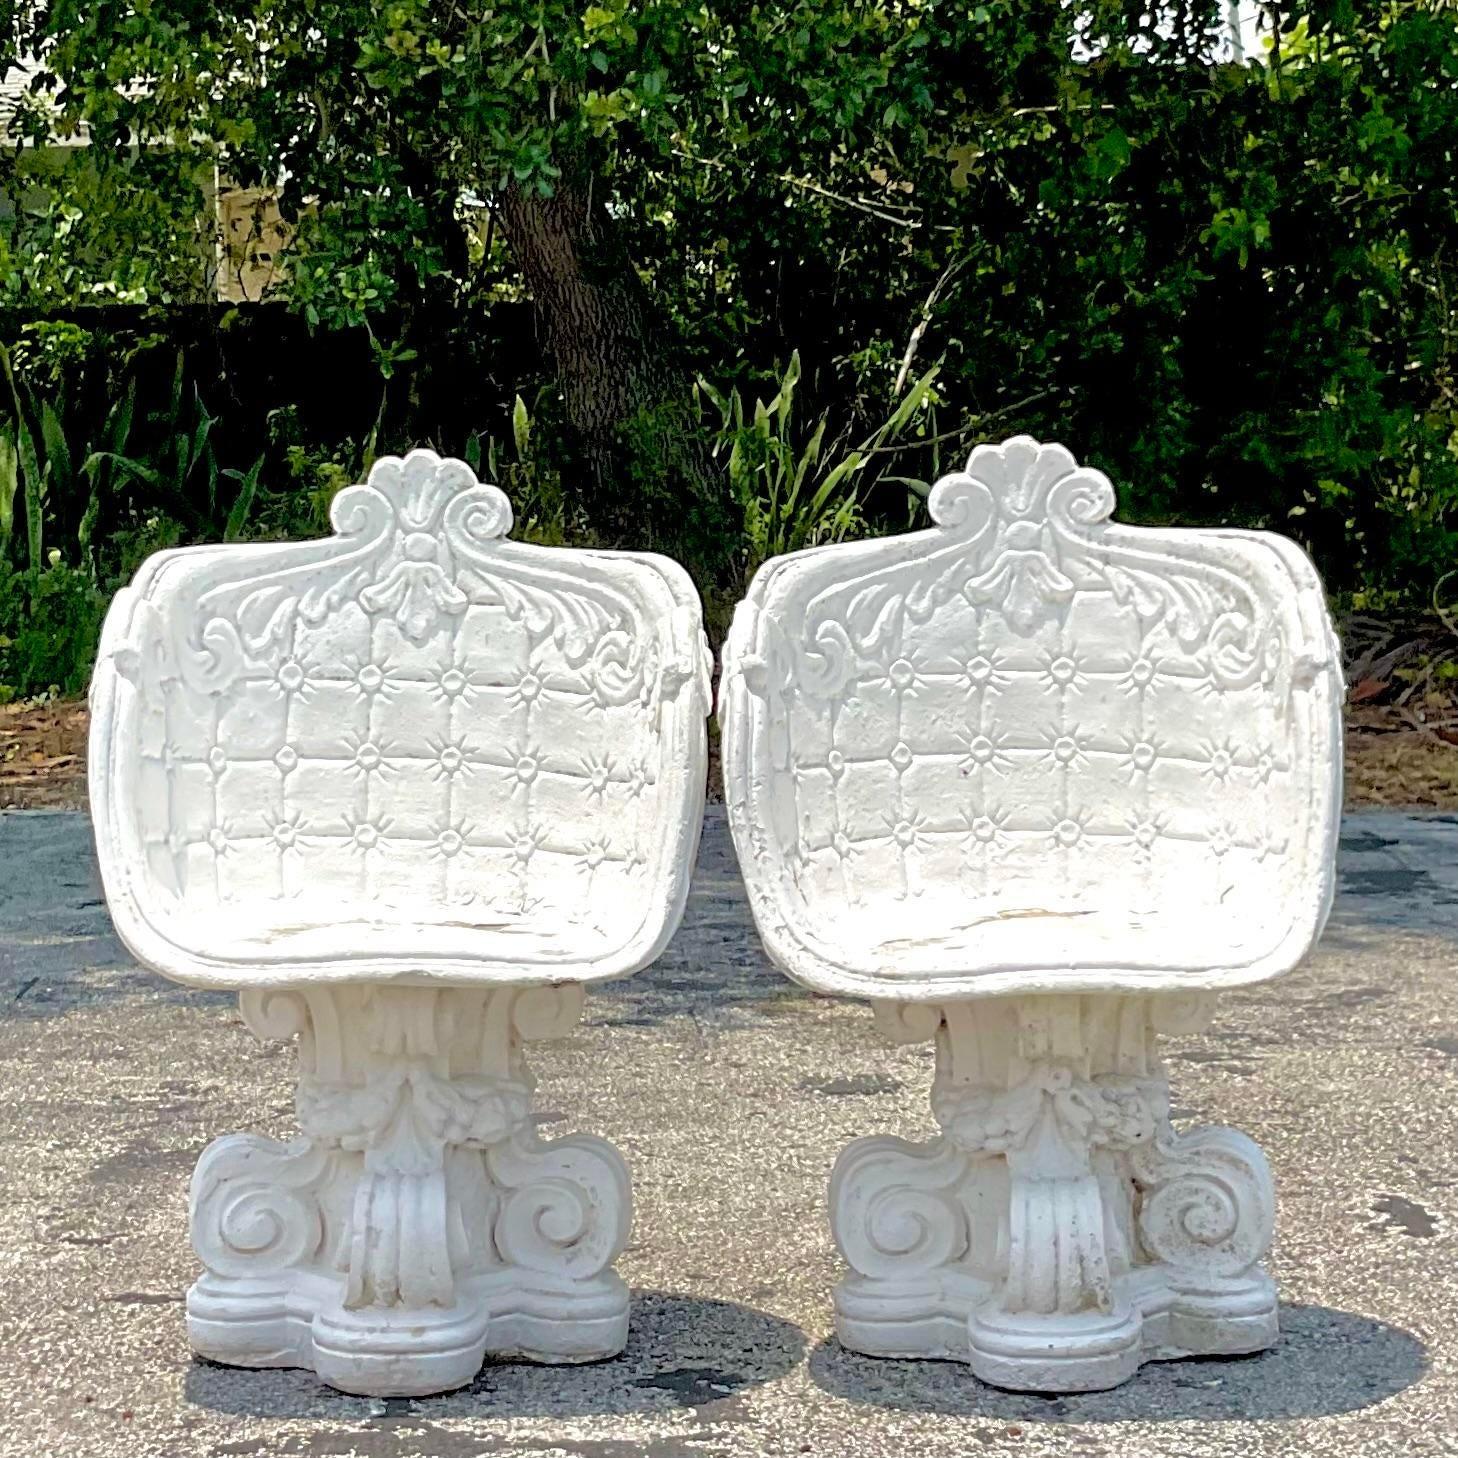 Enhance your outdoor living area with this pair of Vintage Cast Concrete Outdoor Lounge Chairs. American-style design meets durability in these sturdy, elegantly crafted chairs, perfect for adding a touch of timeless sophistication and comfort to